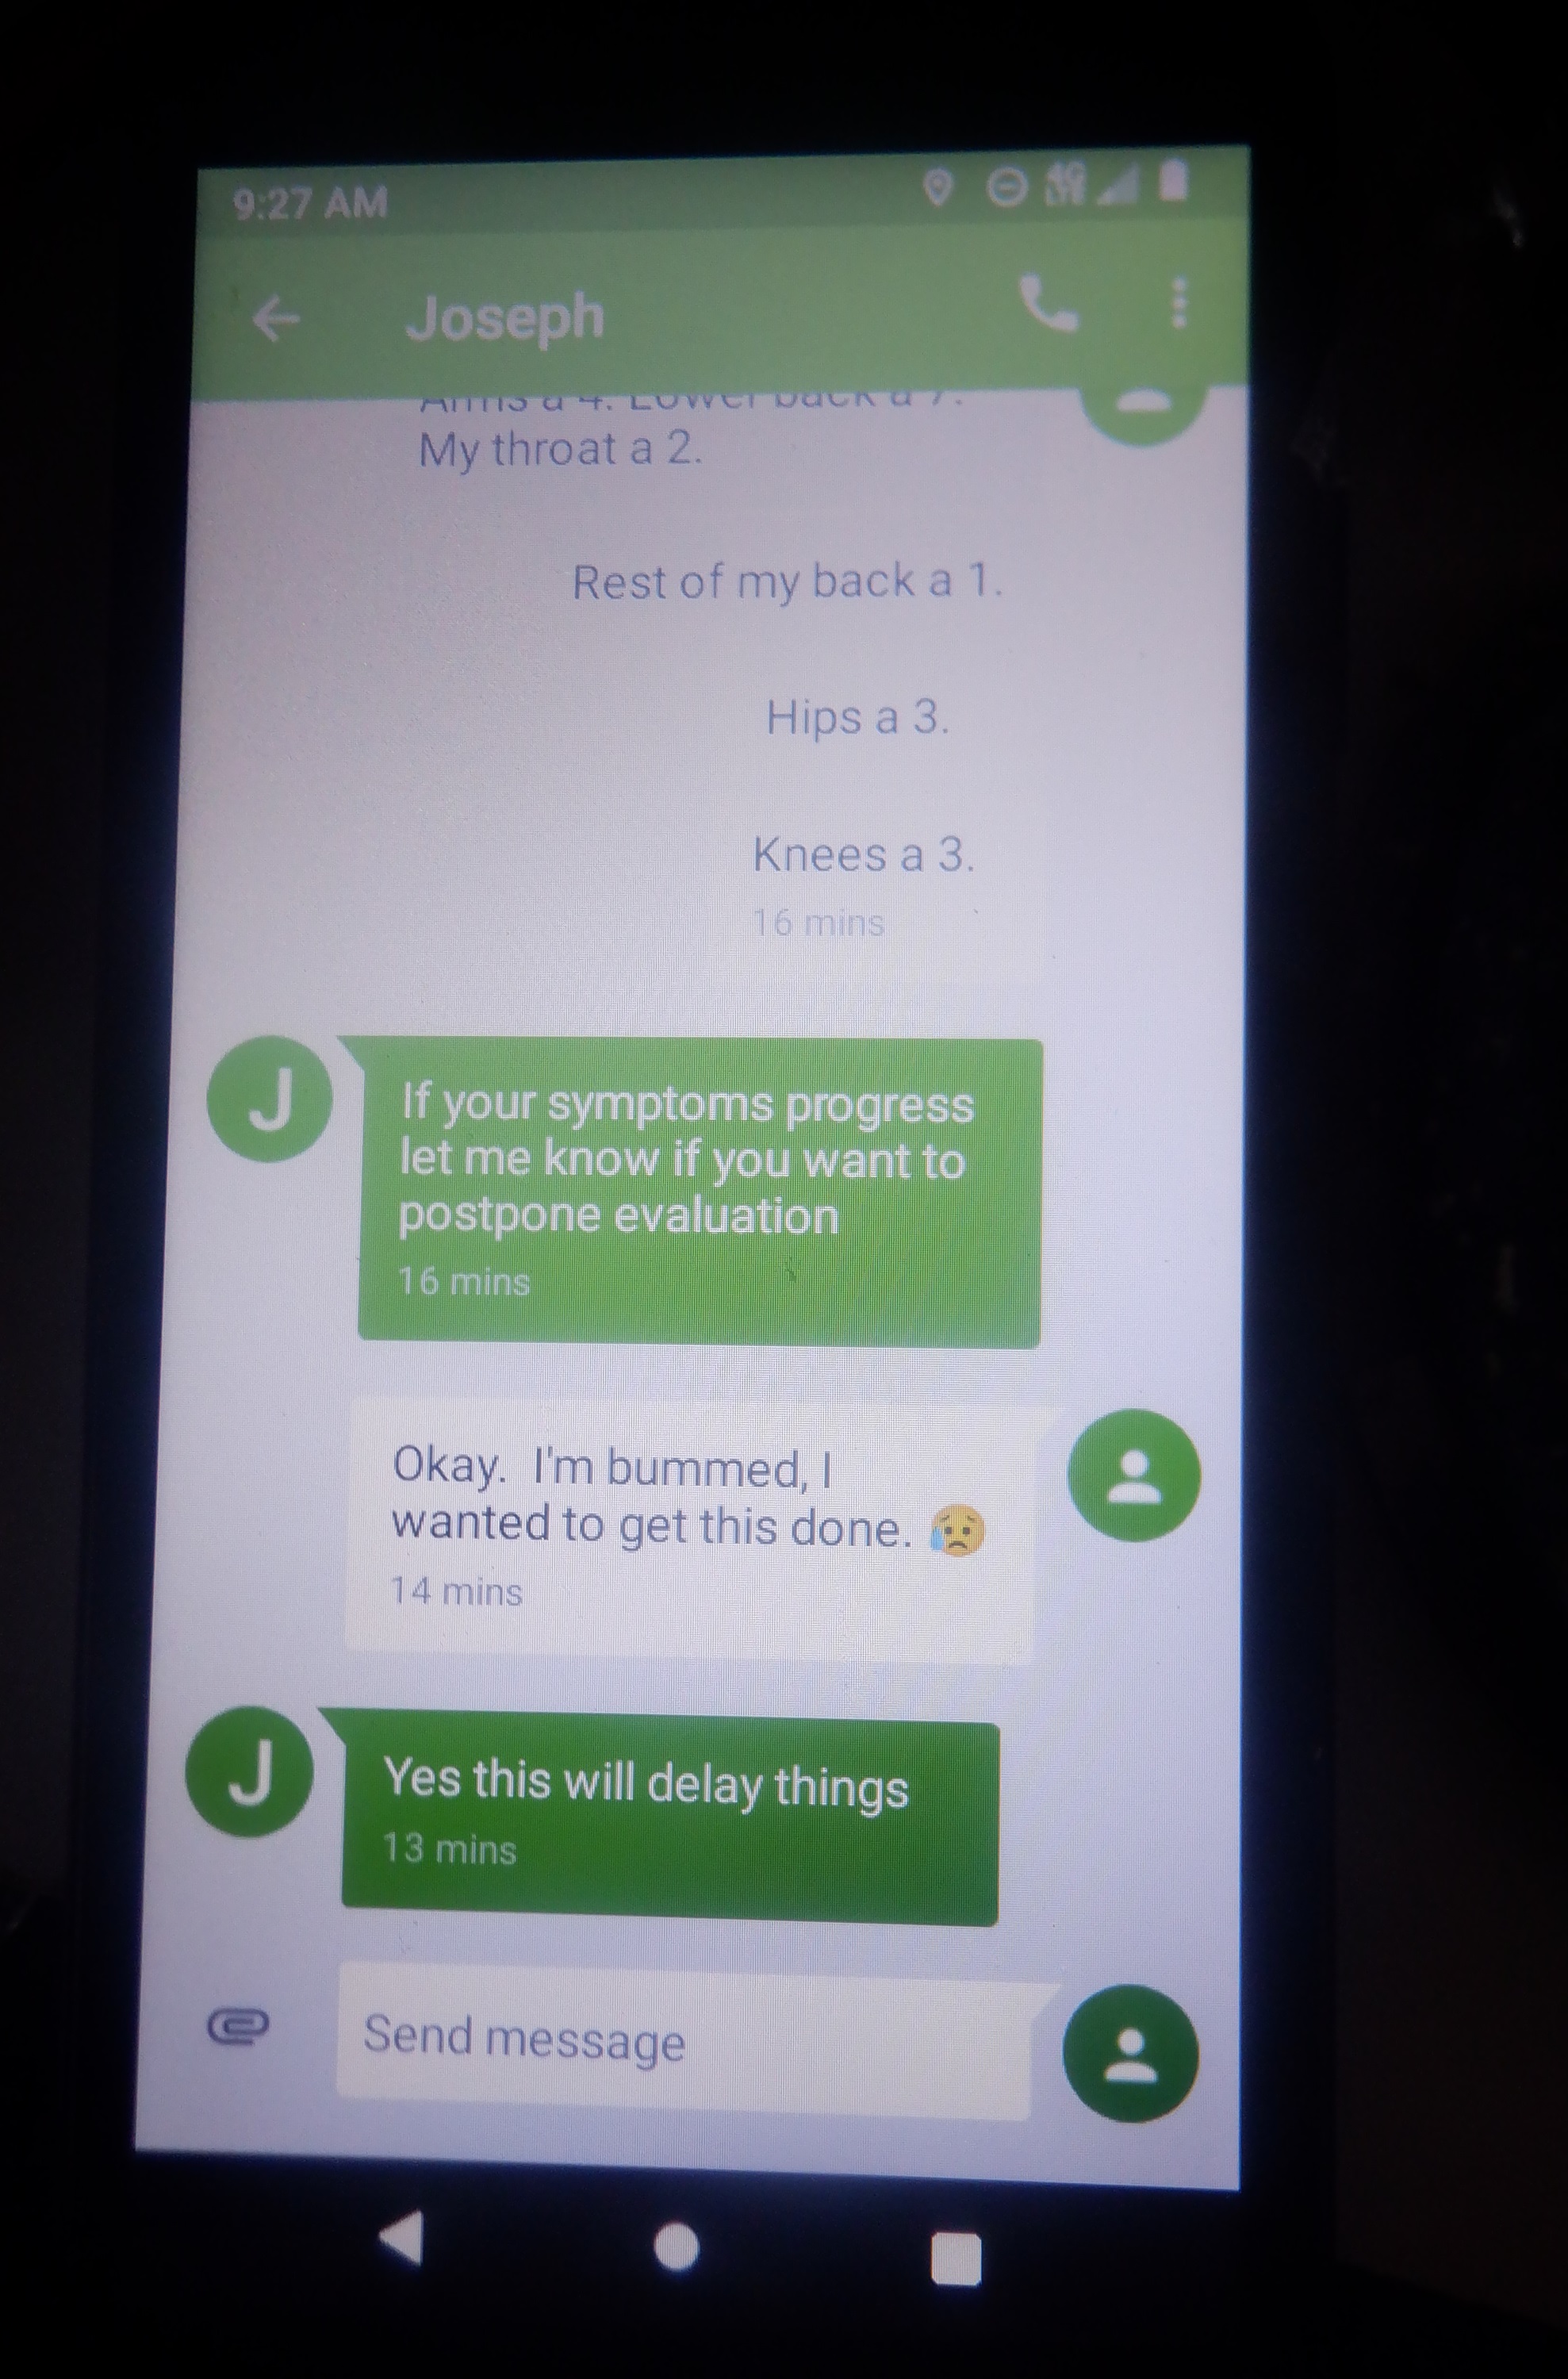 Photo I took of my phone with convo with instructor